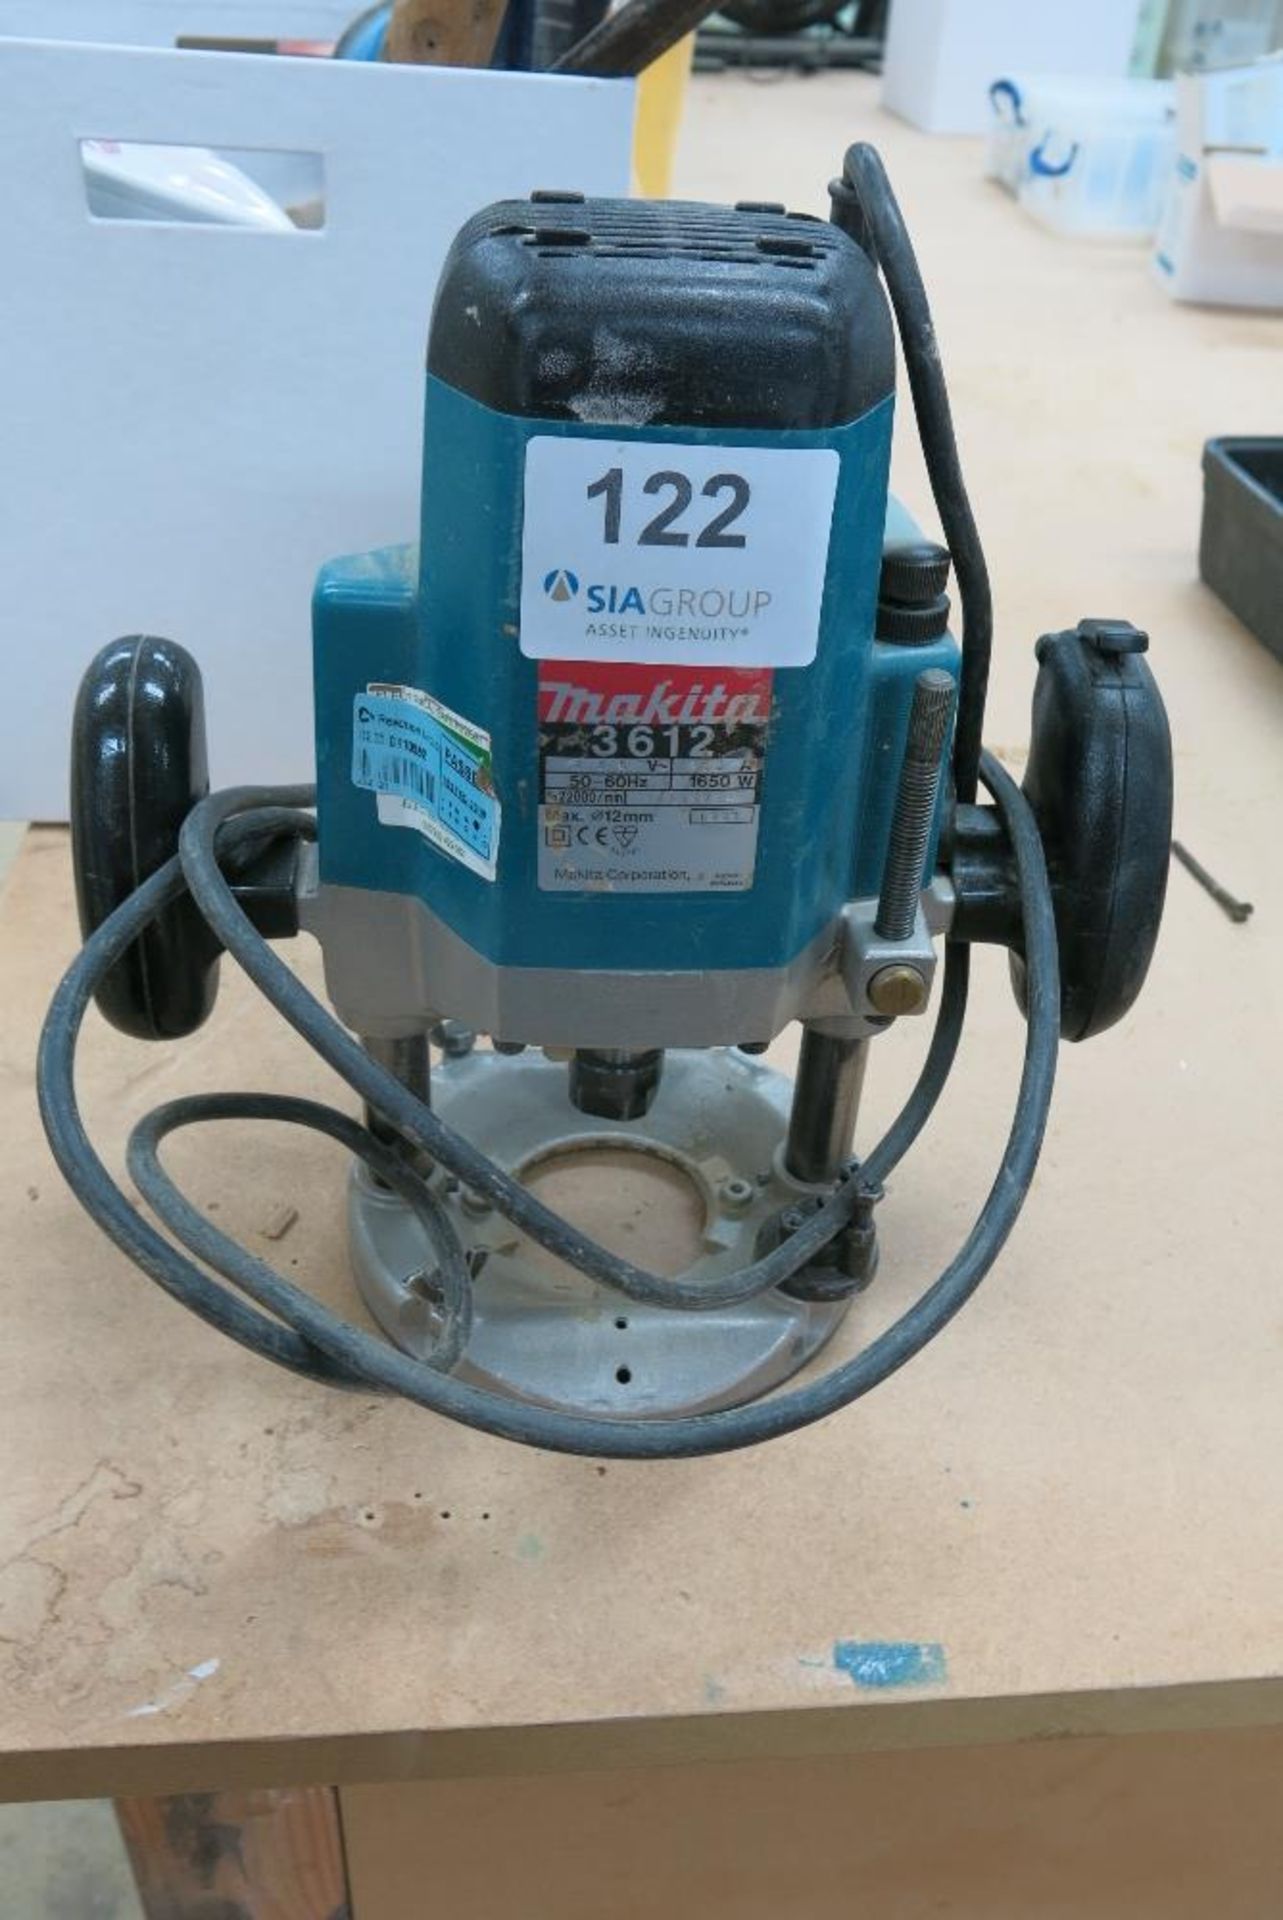 Makita 3612 plunge router